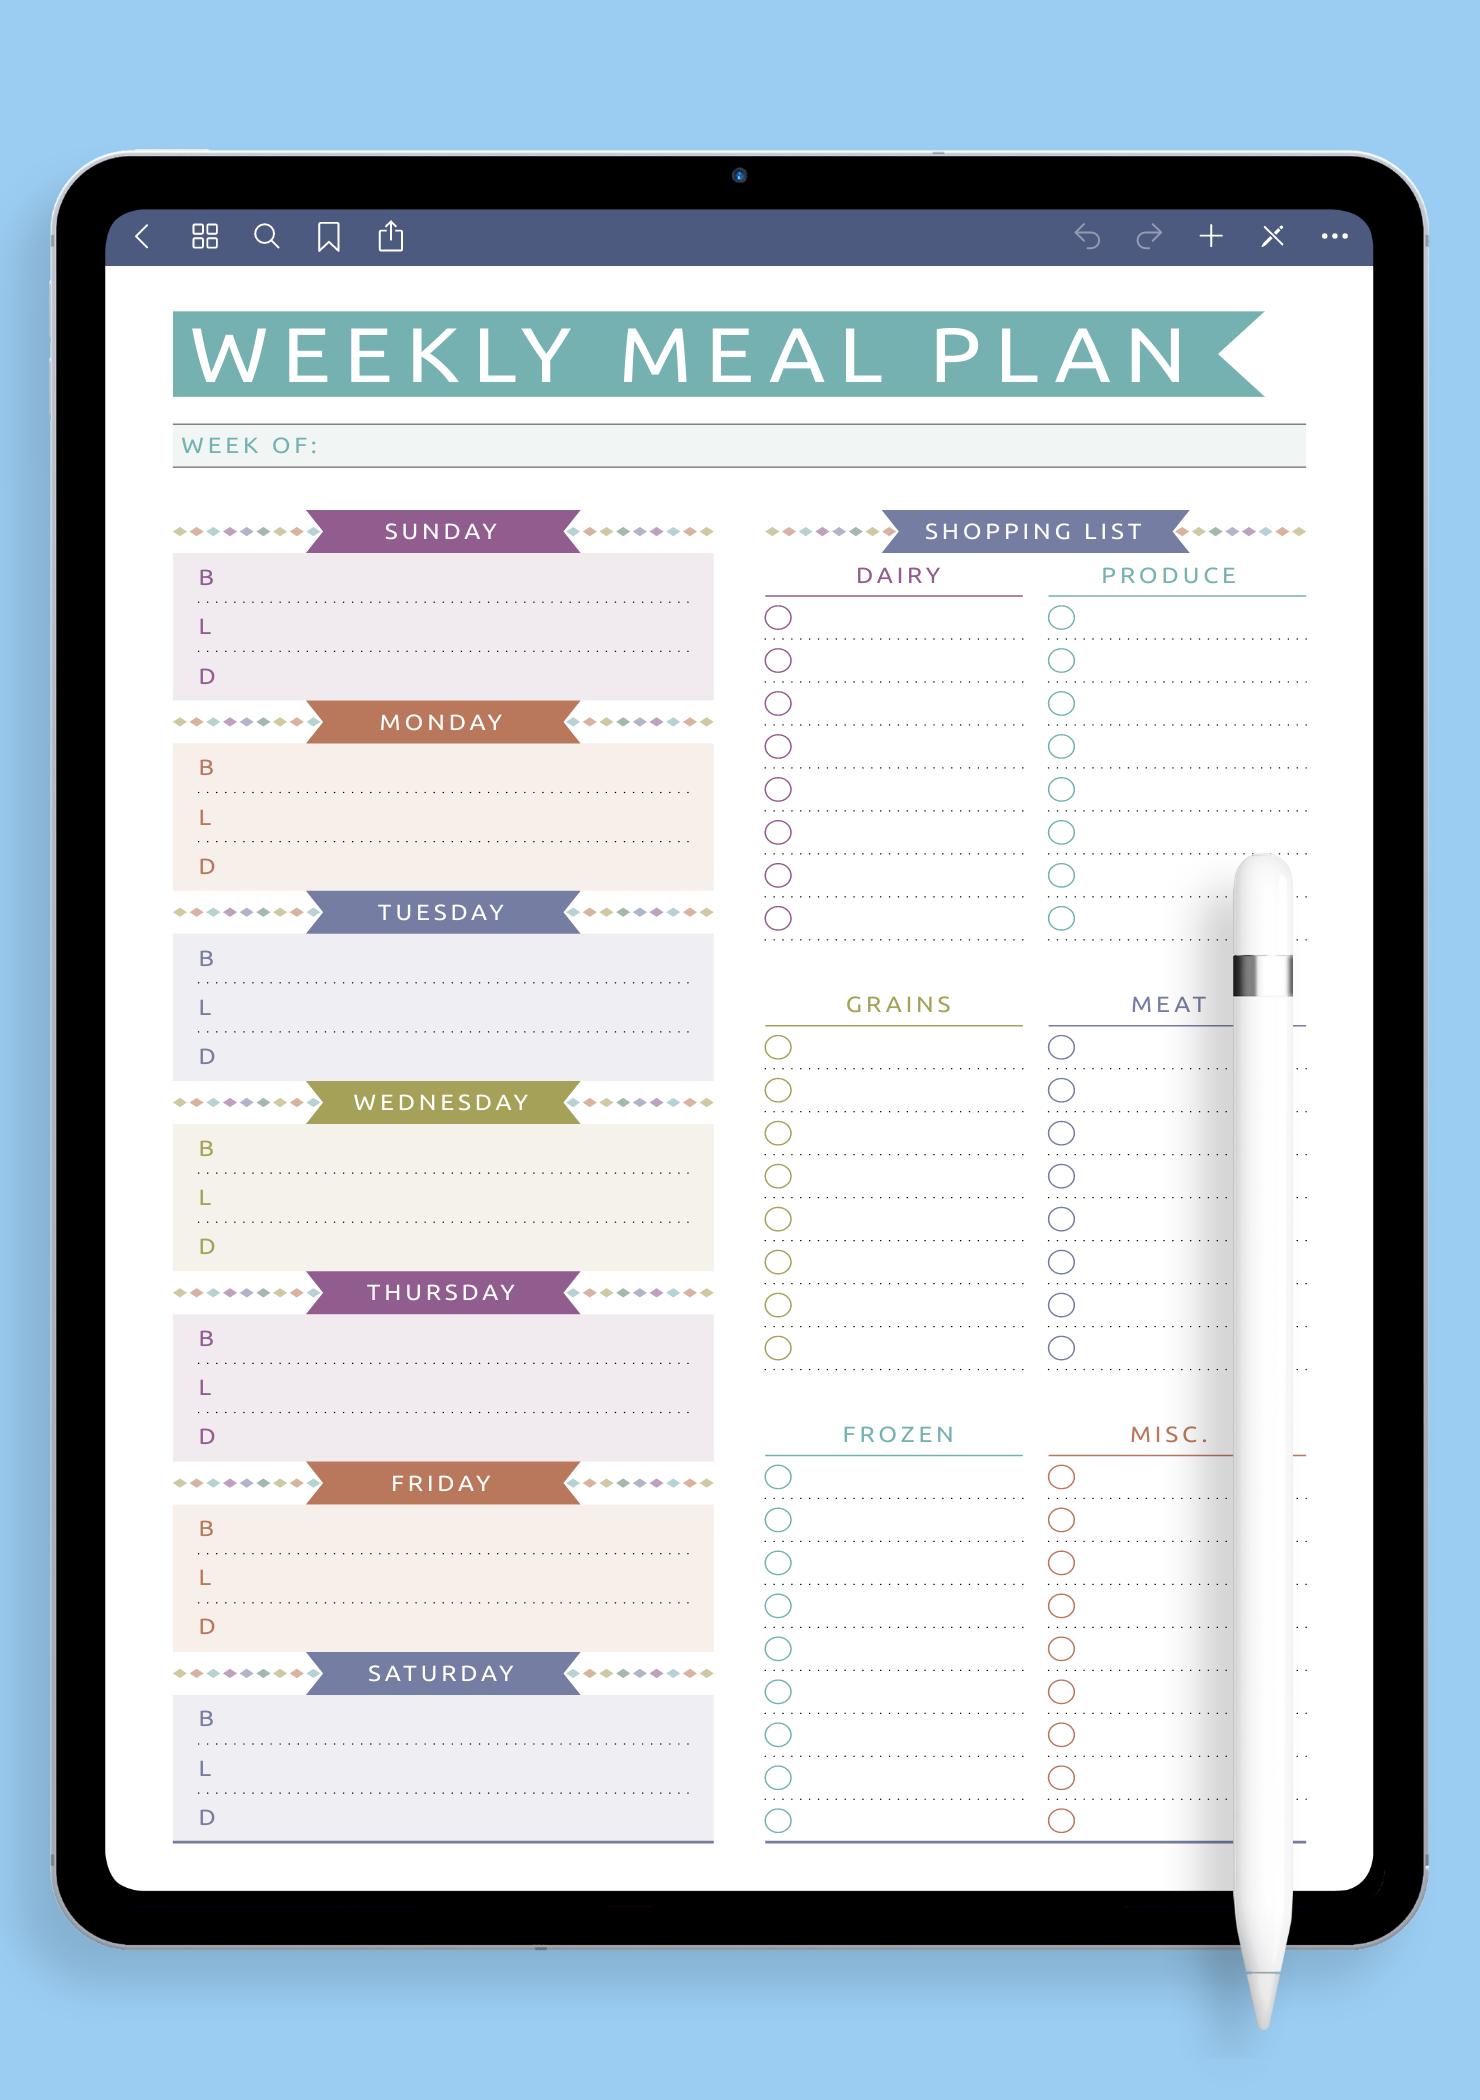 Download Printable Weekly Meal Plan with Shopping List - Casual Style PDF